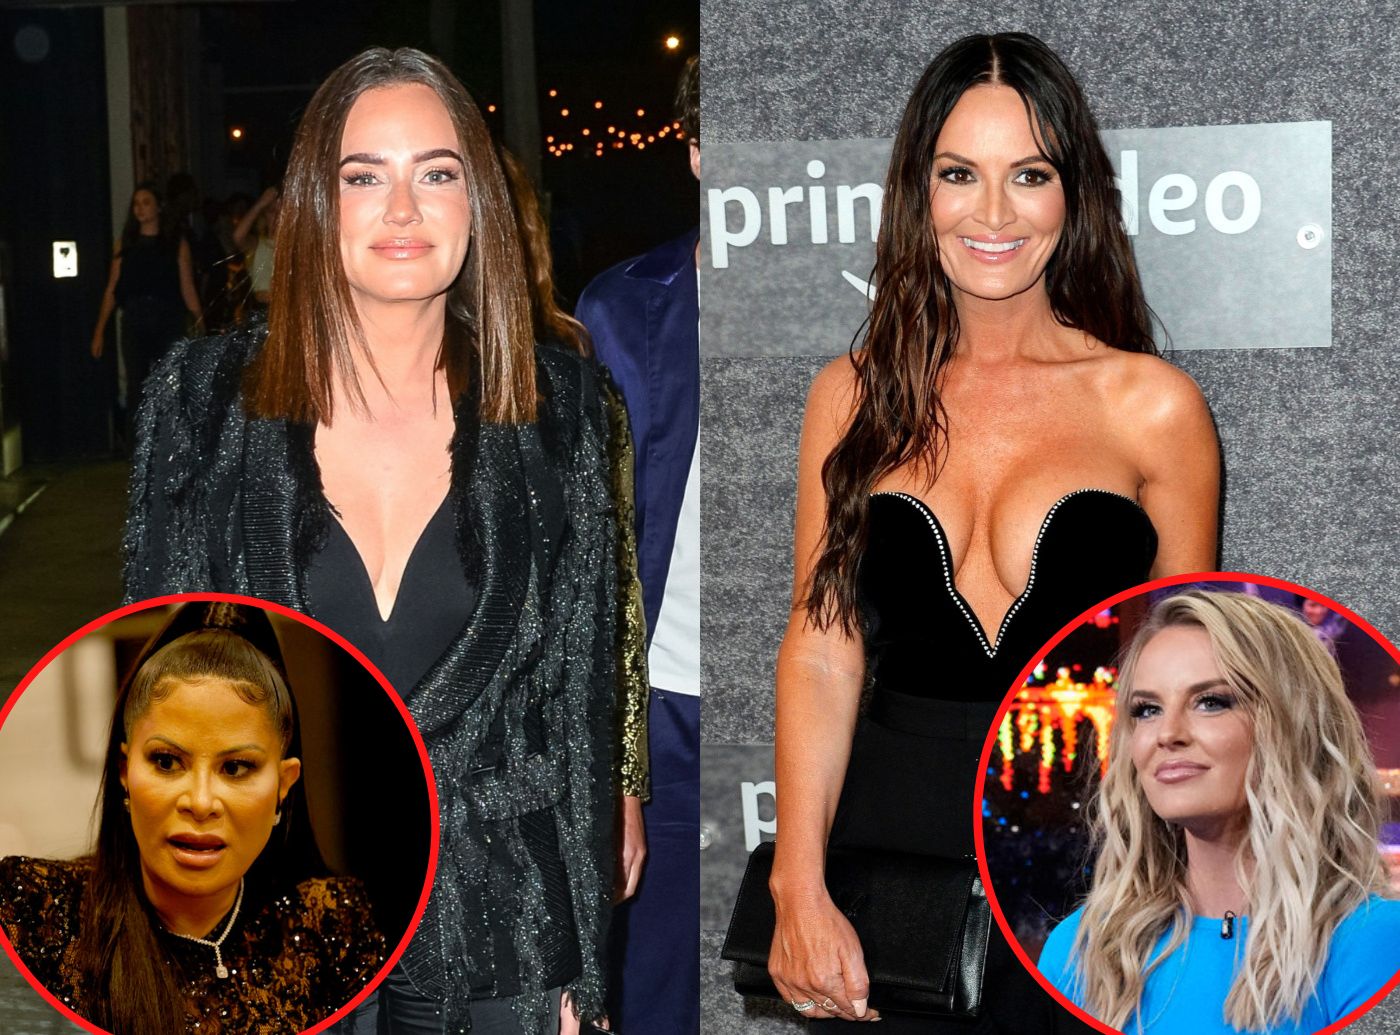 RHOSLC: Meredith Marks Reveals Jen Shah Was Source of Lisa Cheating Rumors, Plus Whitney Shares New Rumor About Lisa and “Wealthy” Investor